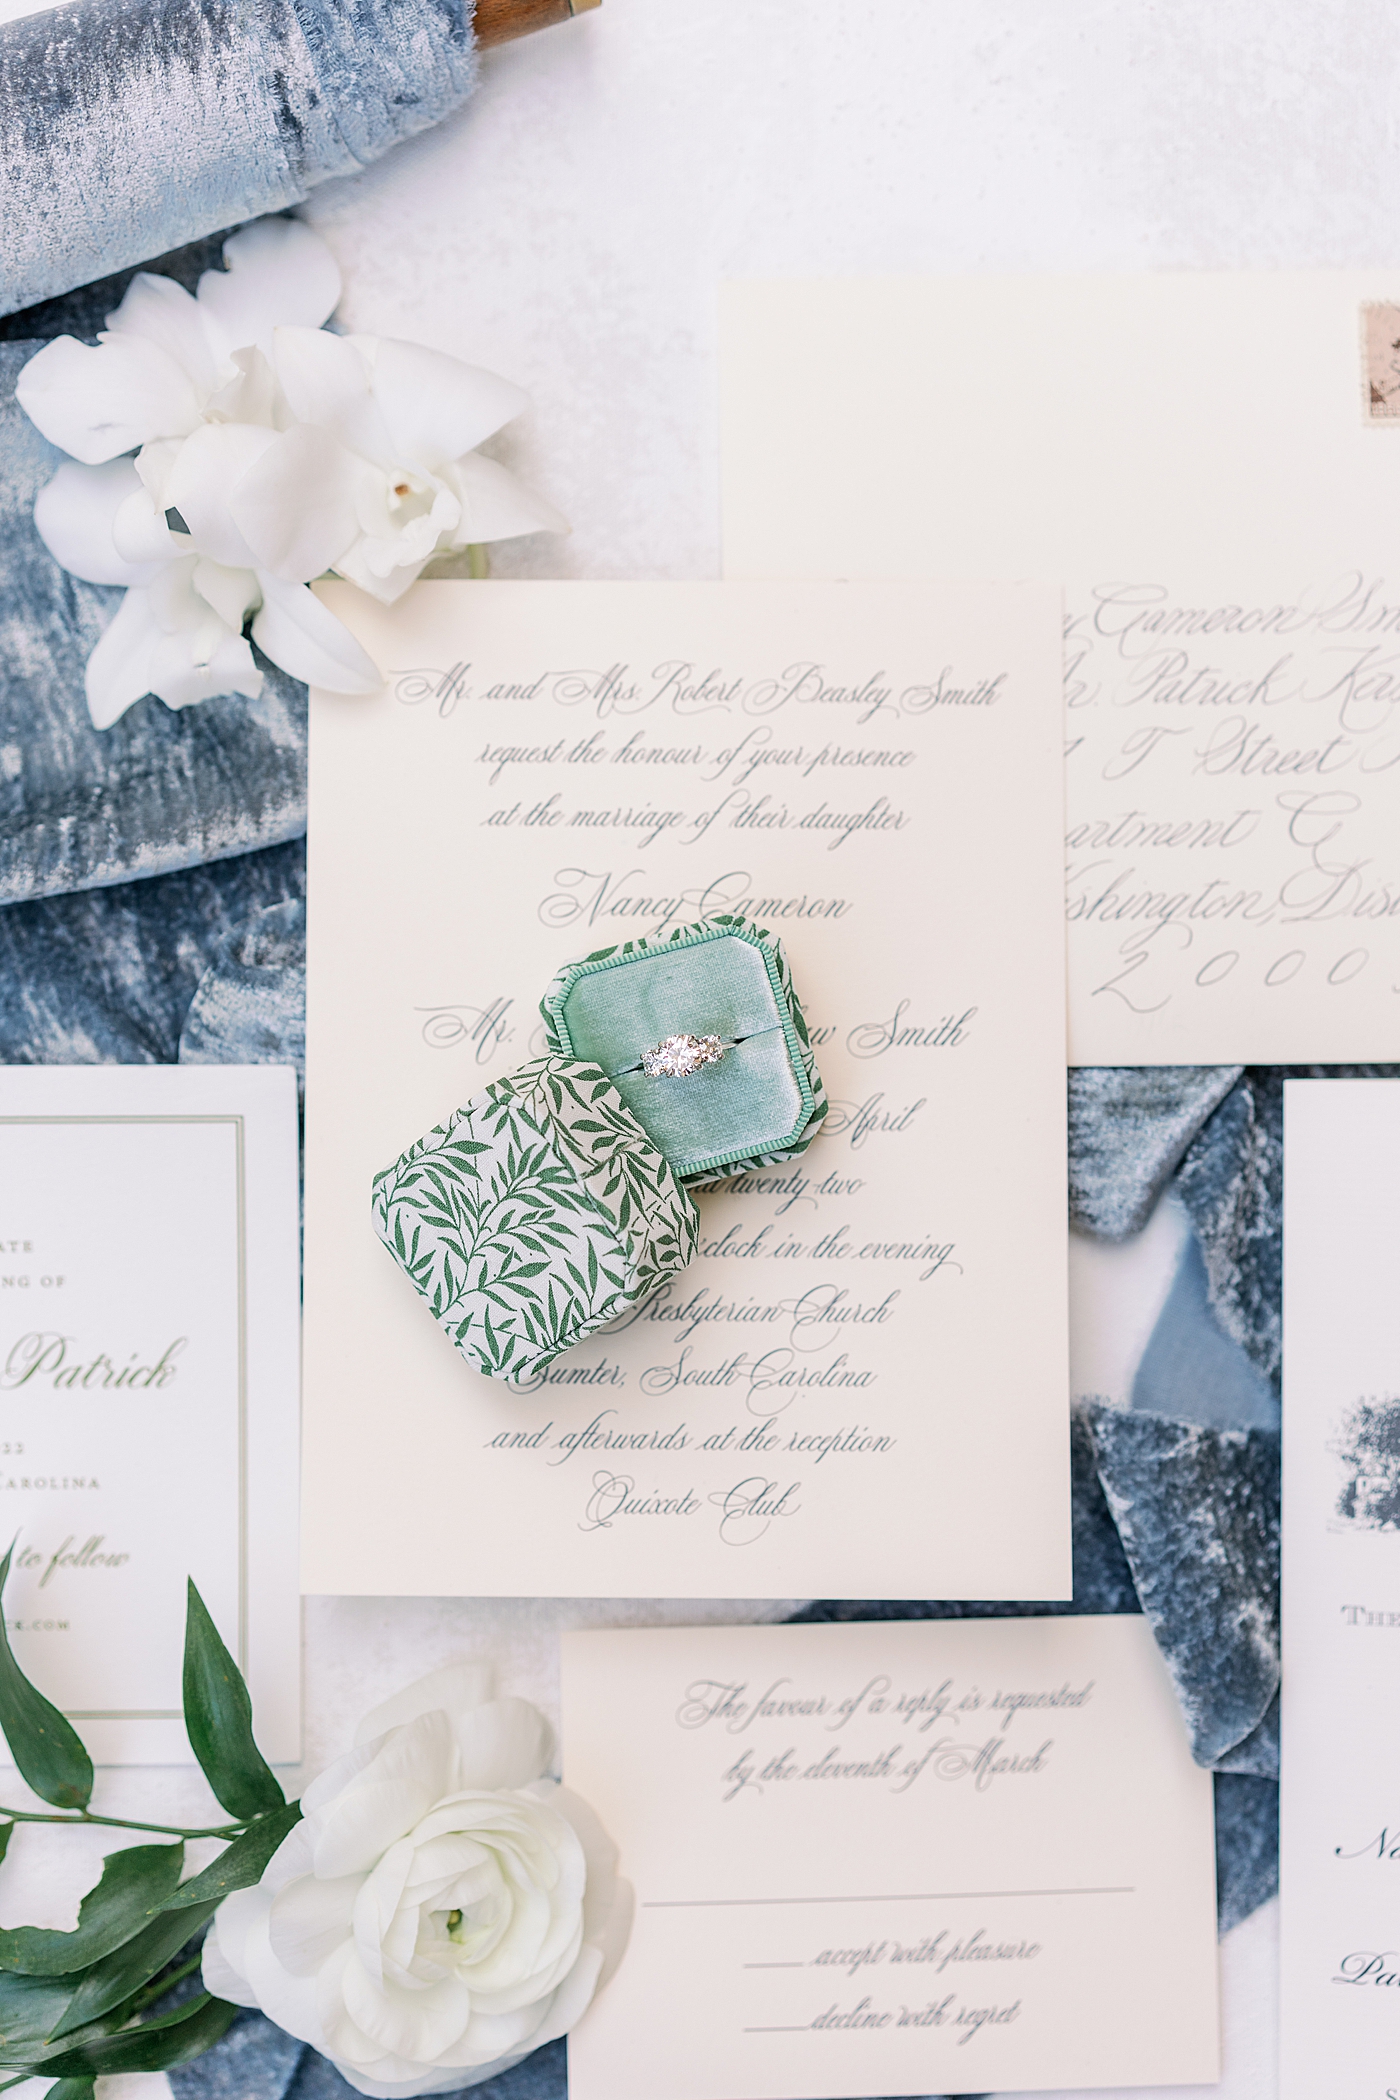 Custom ring box with green and white floral design | Photo by Annie Laura Photography